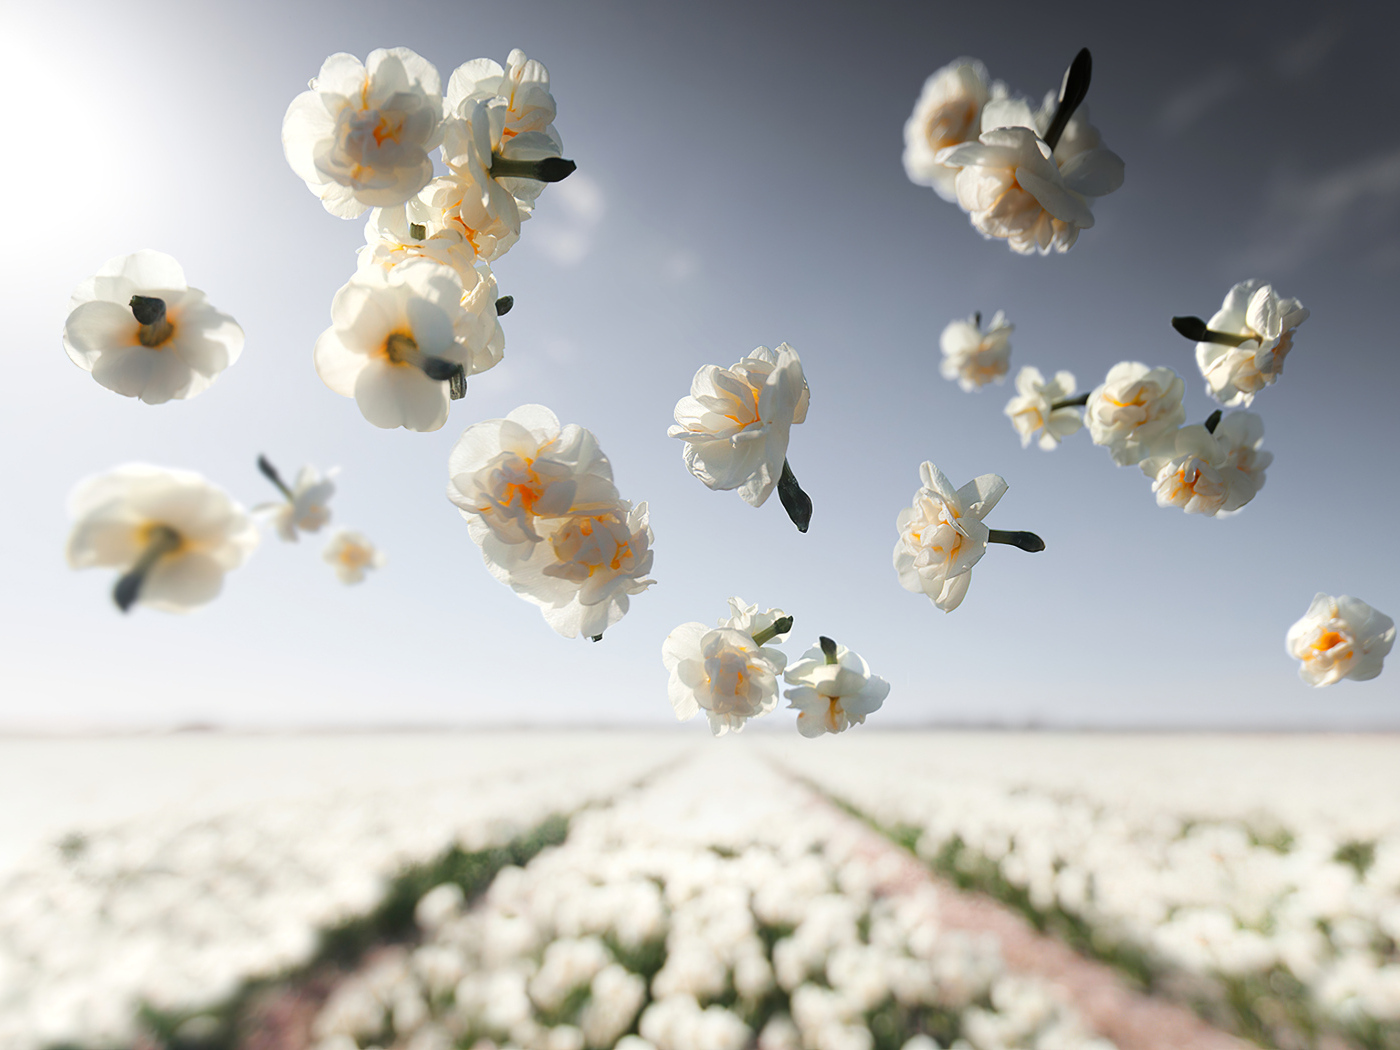 White narcissus flowers fly over the field